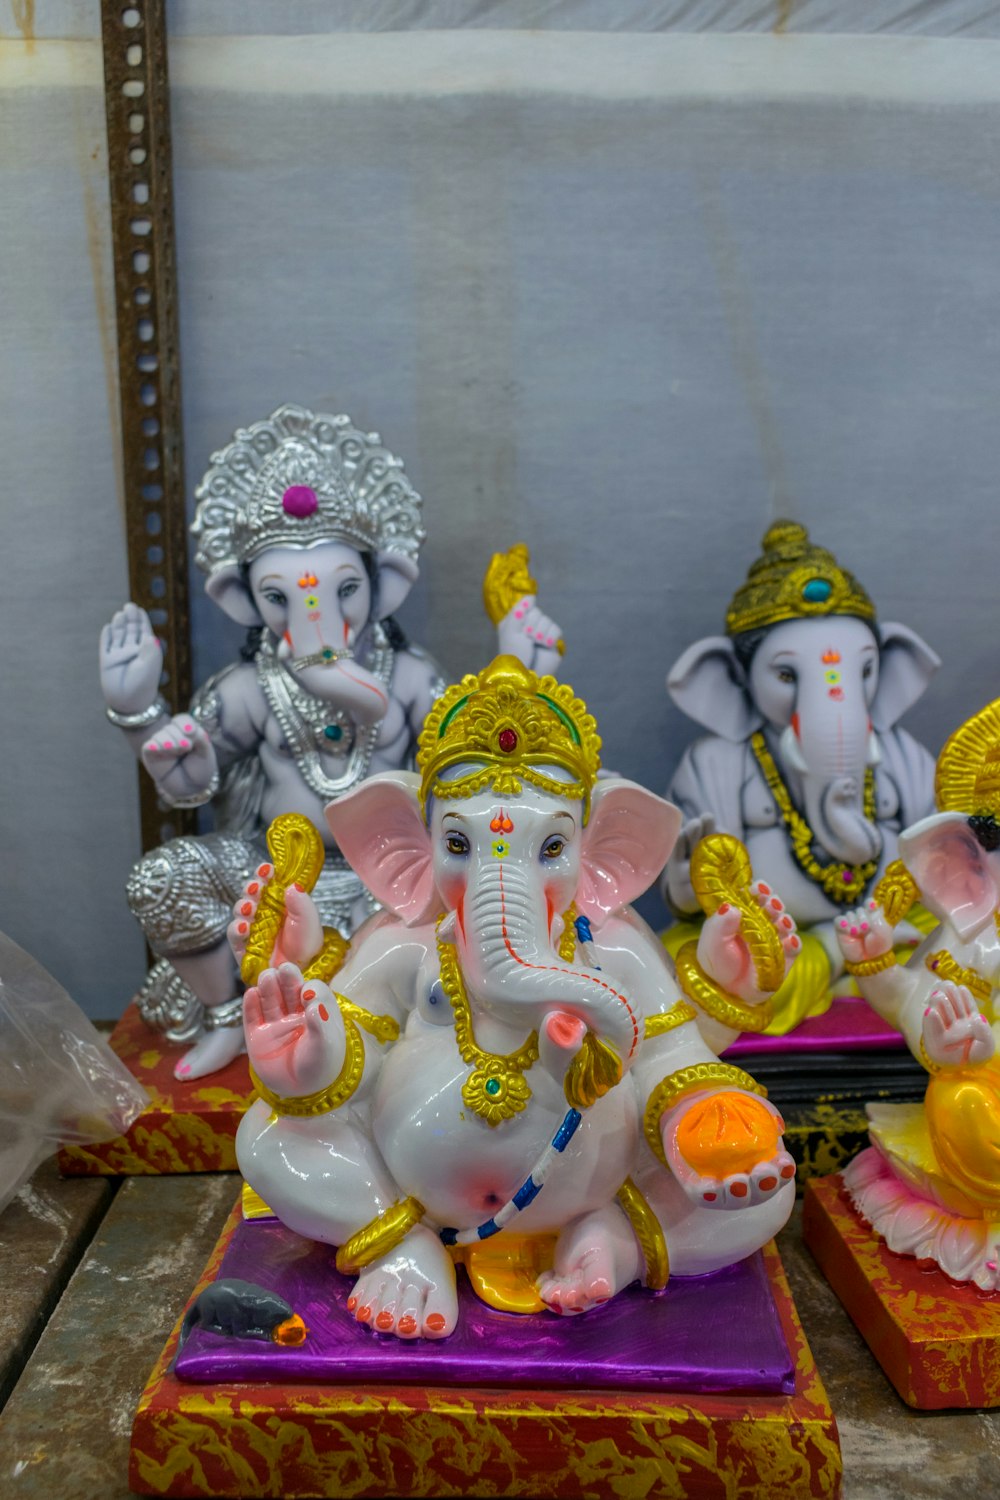 a group of small statues of elephants on a table